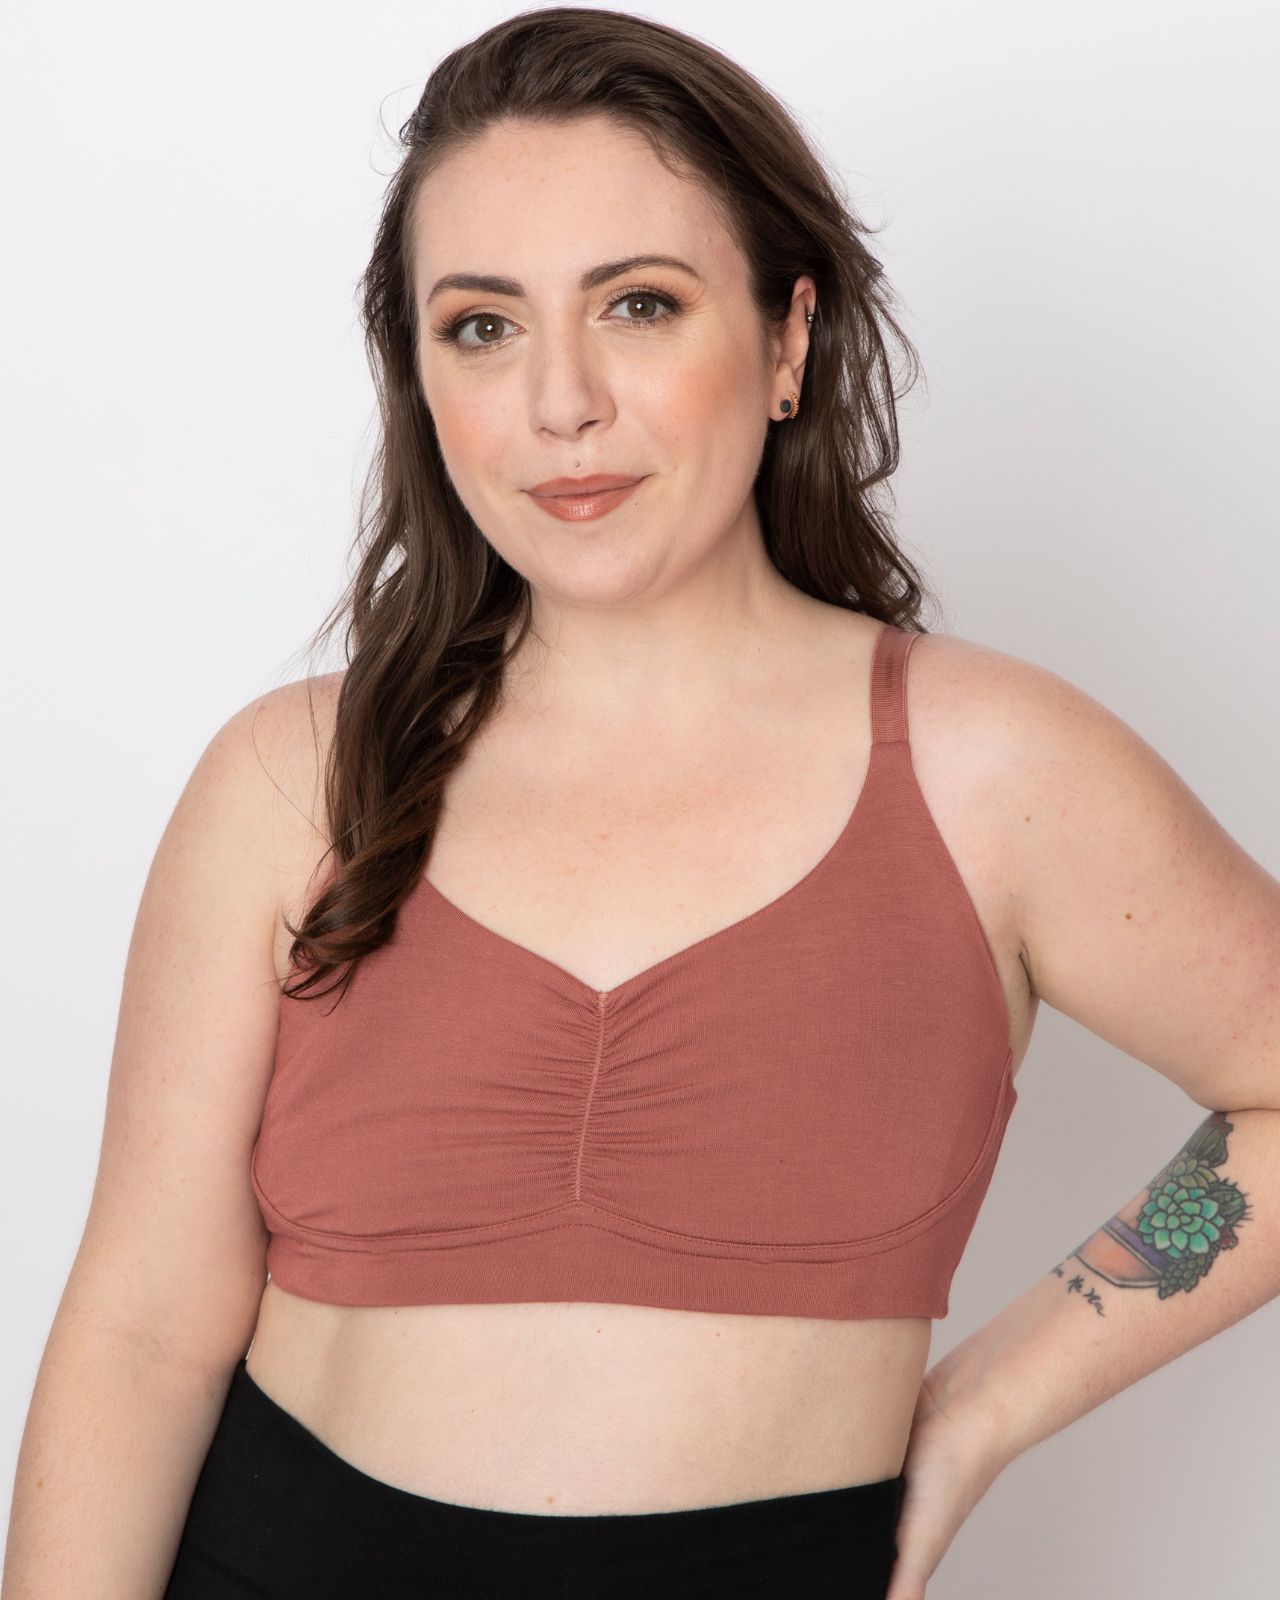 White woman wearing a rose colored bra